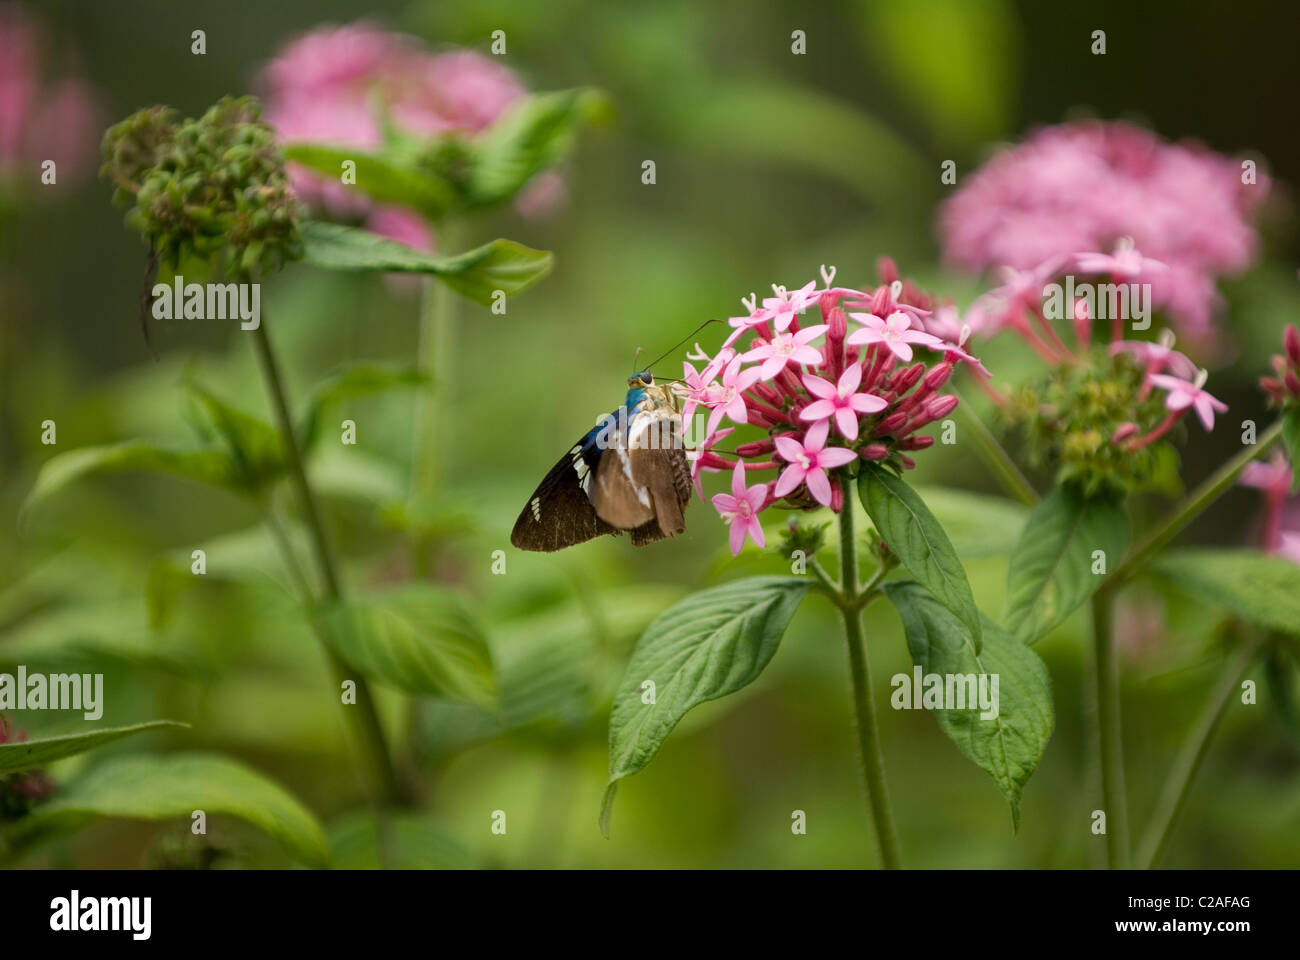 Pentas flower with blue butterfly in Costa Rica Stock Photo